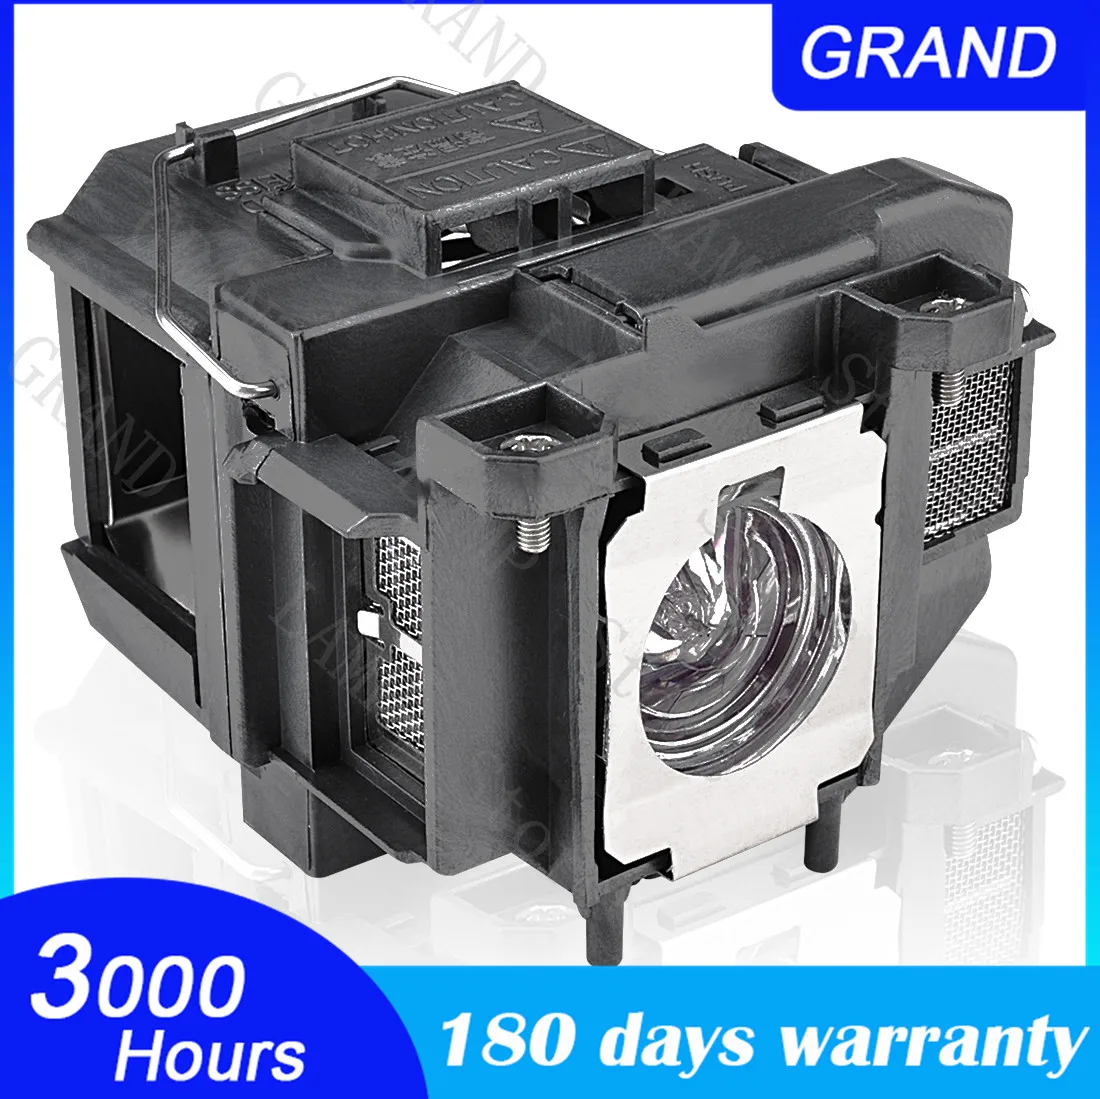 

ELPLP78 Replacement Projector Lamp bulb for EPSON EB-945/955W/965/S17/S18/SXW03/SXW18/W18/W22/EB-965/955W/950W/945/940 projector